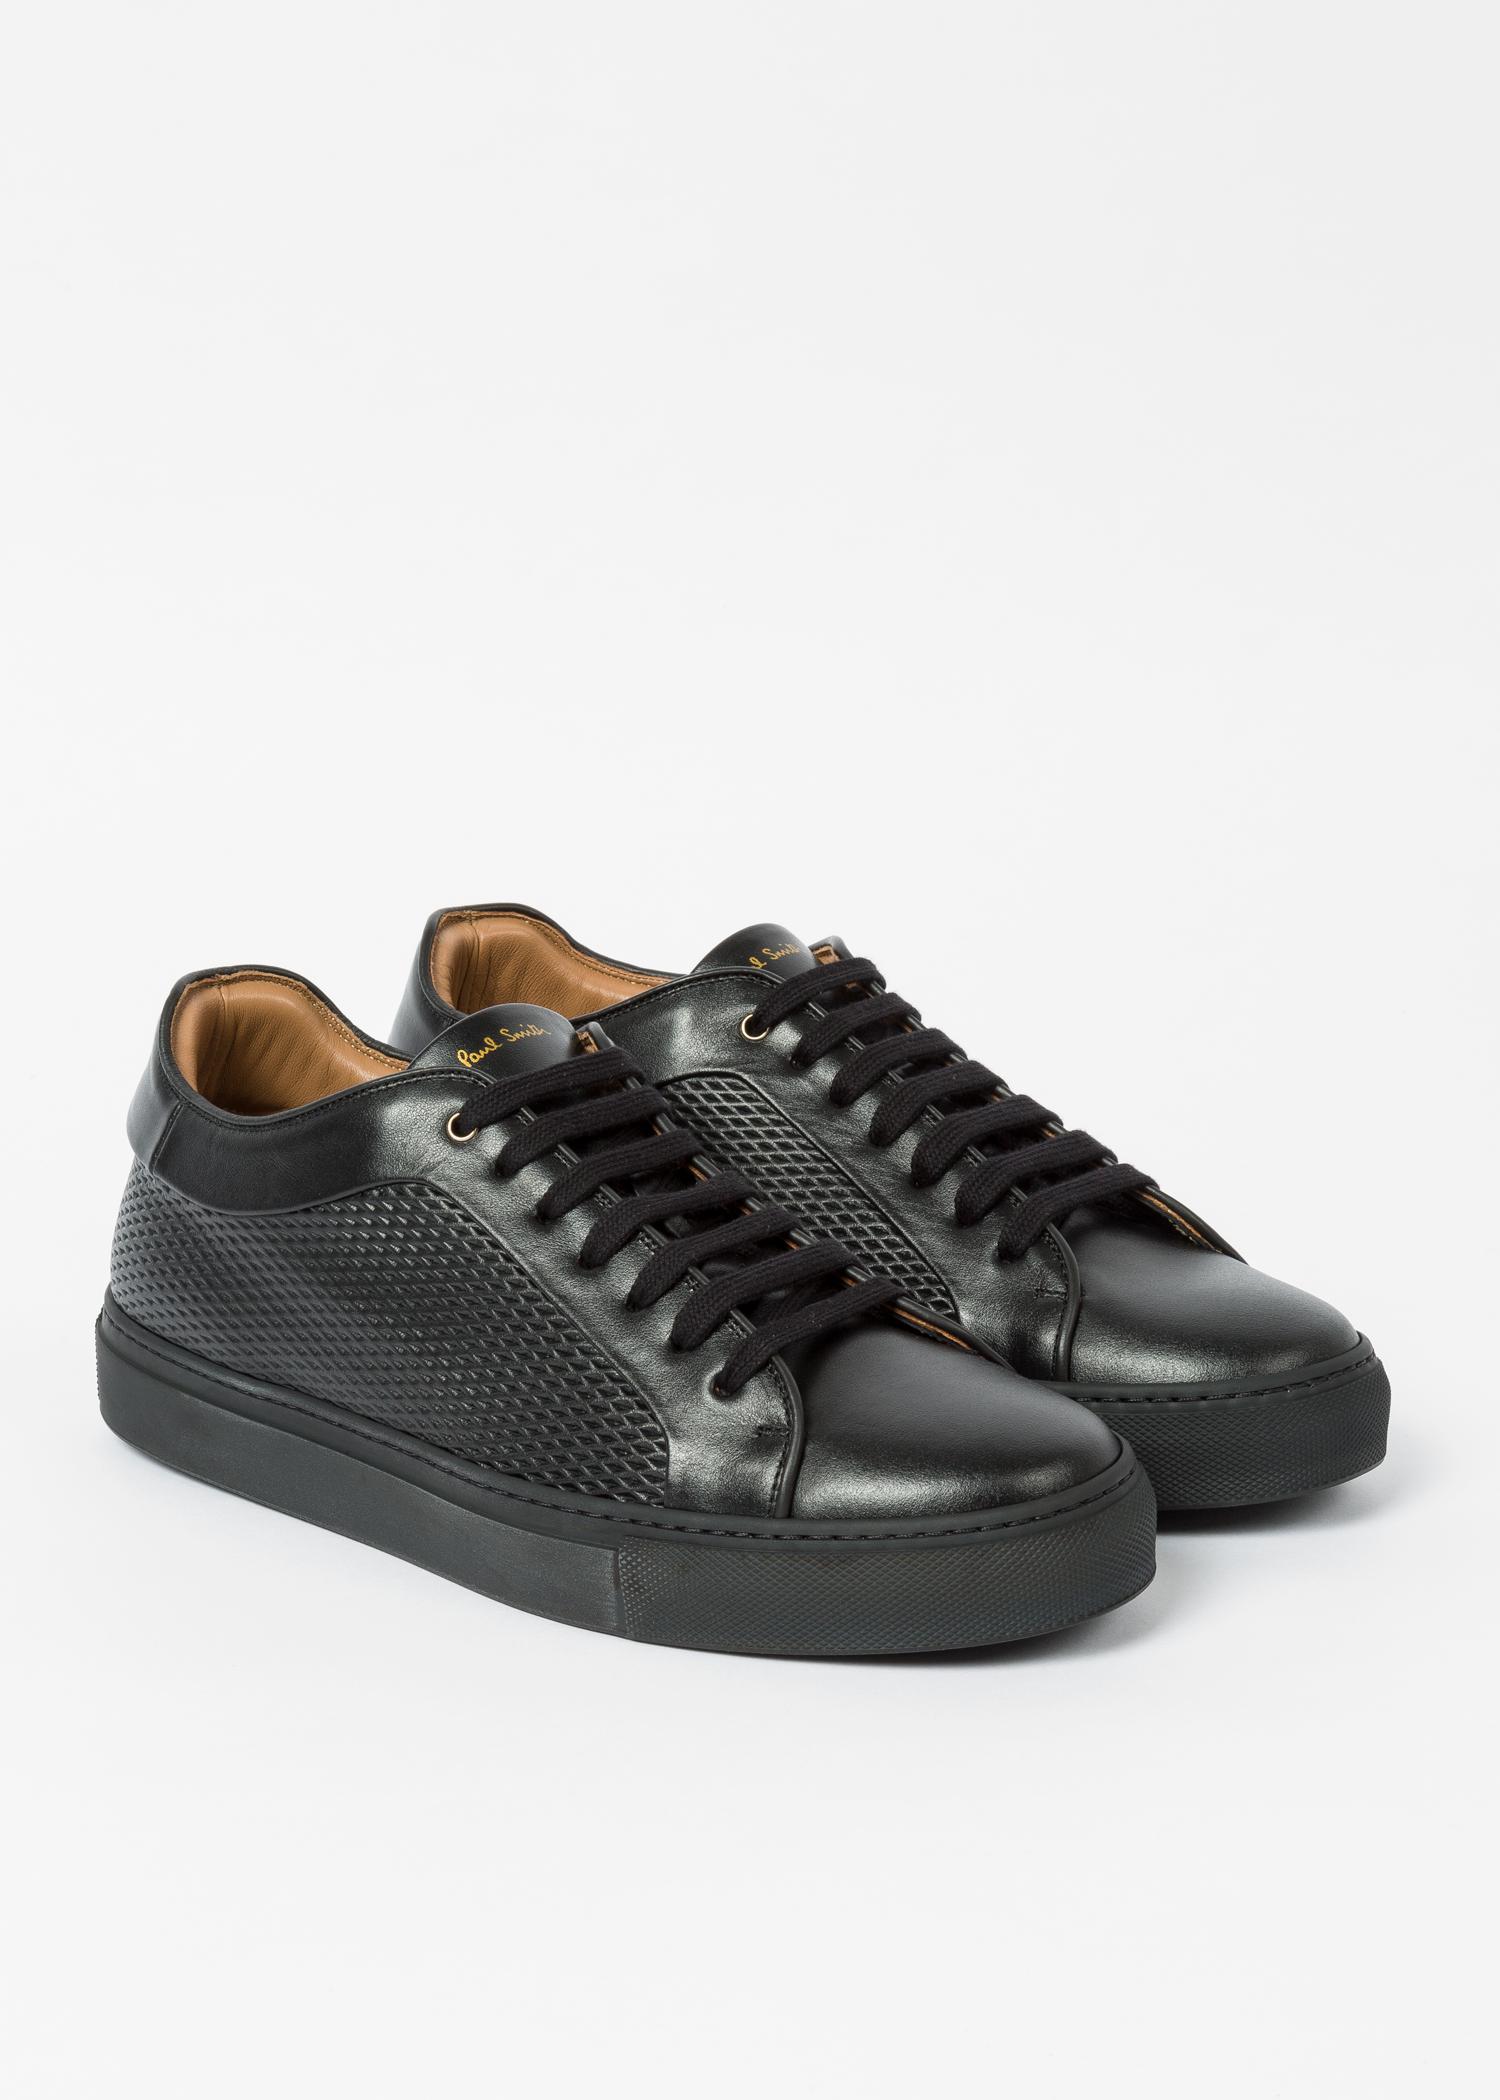 paul smith basso trainers black